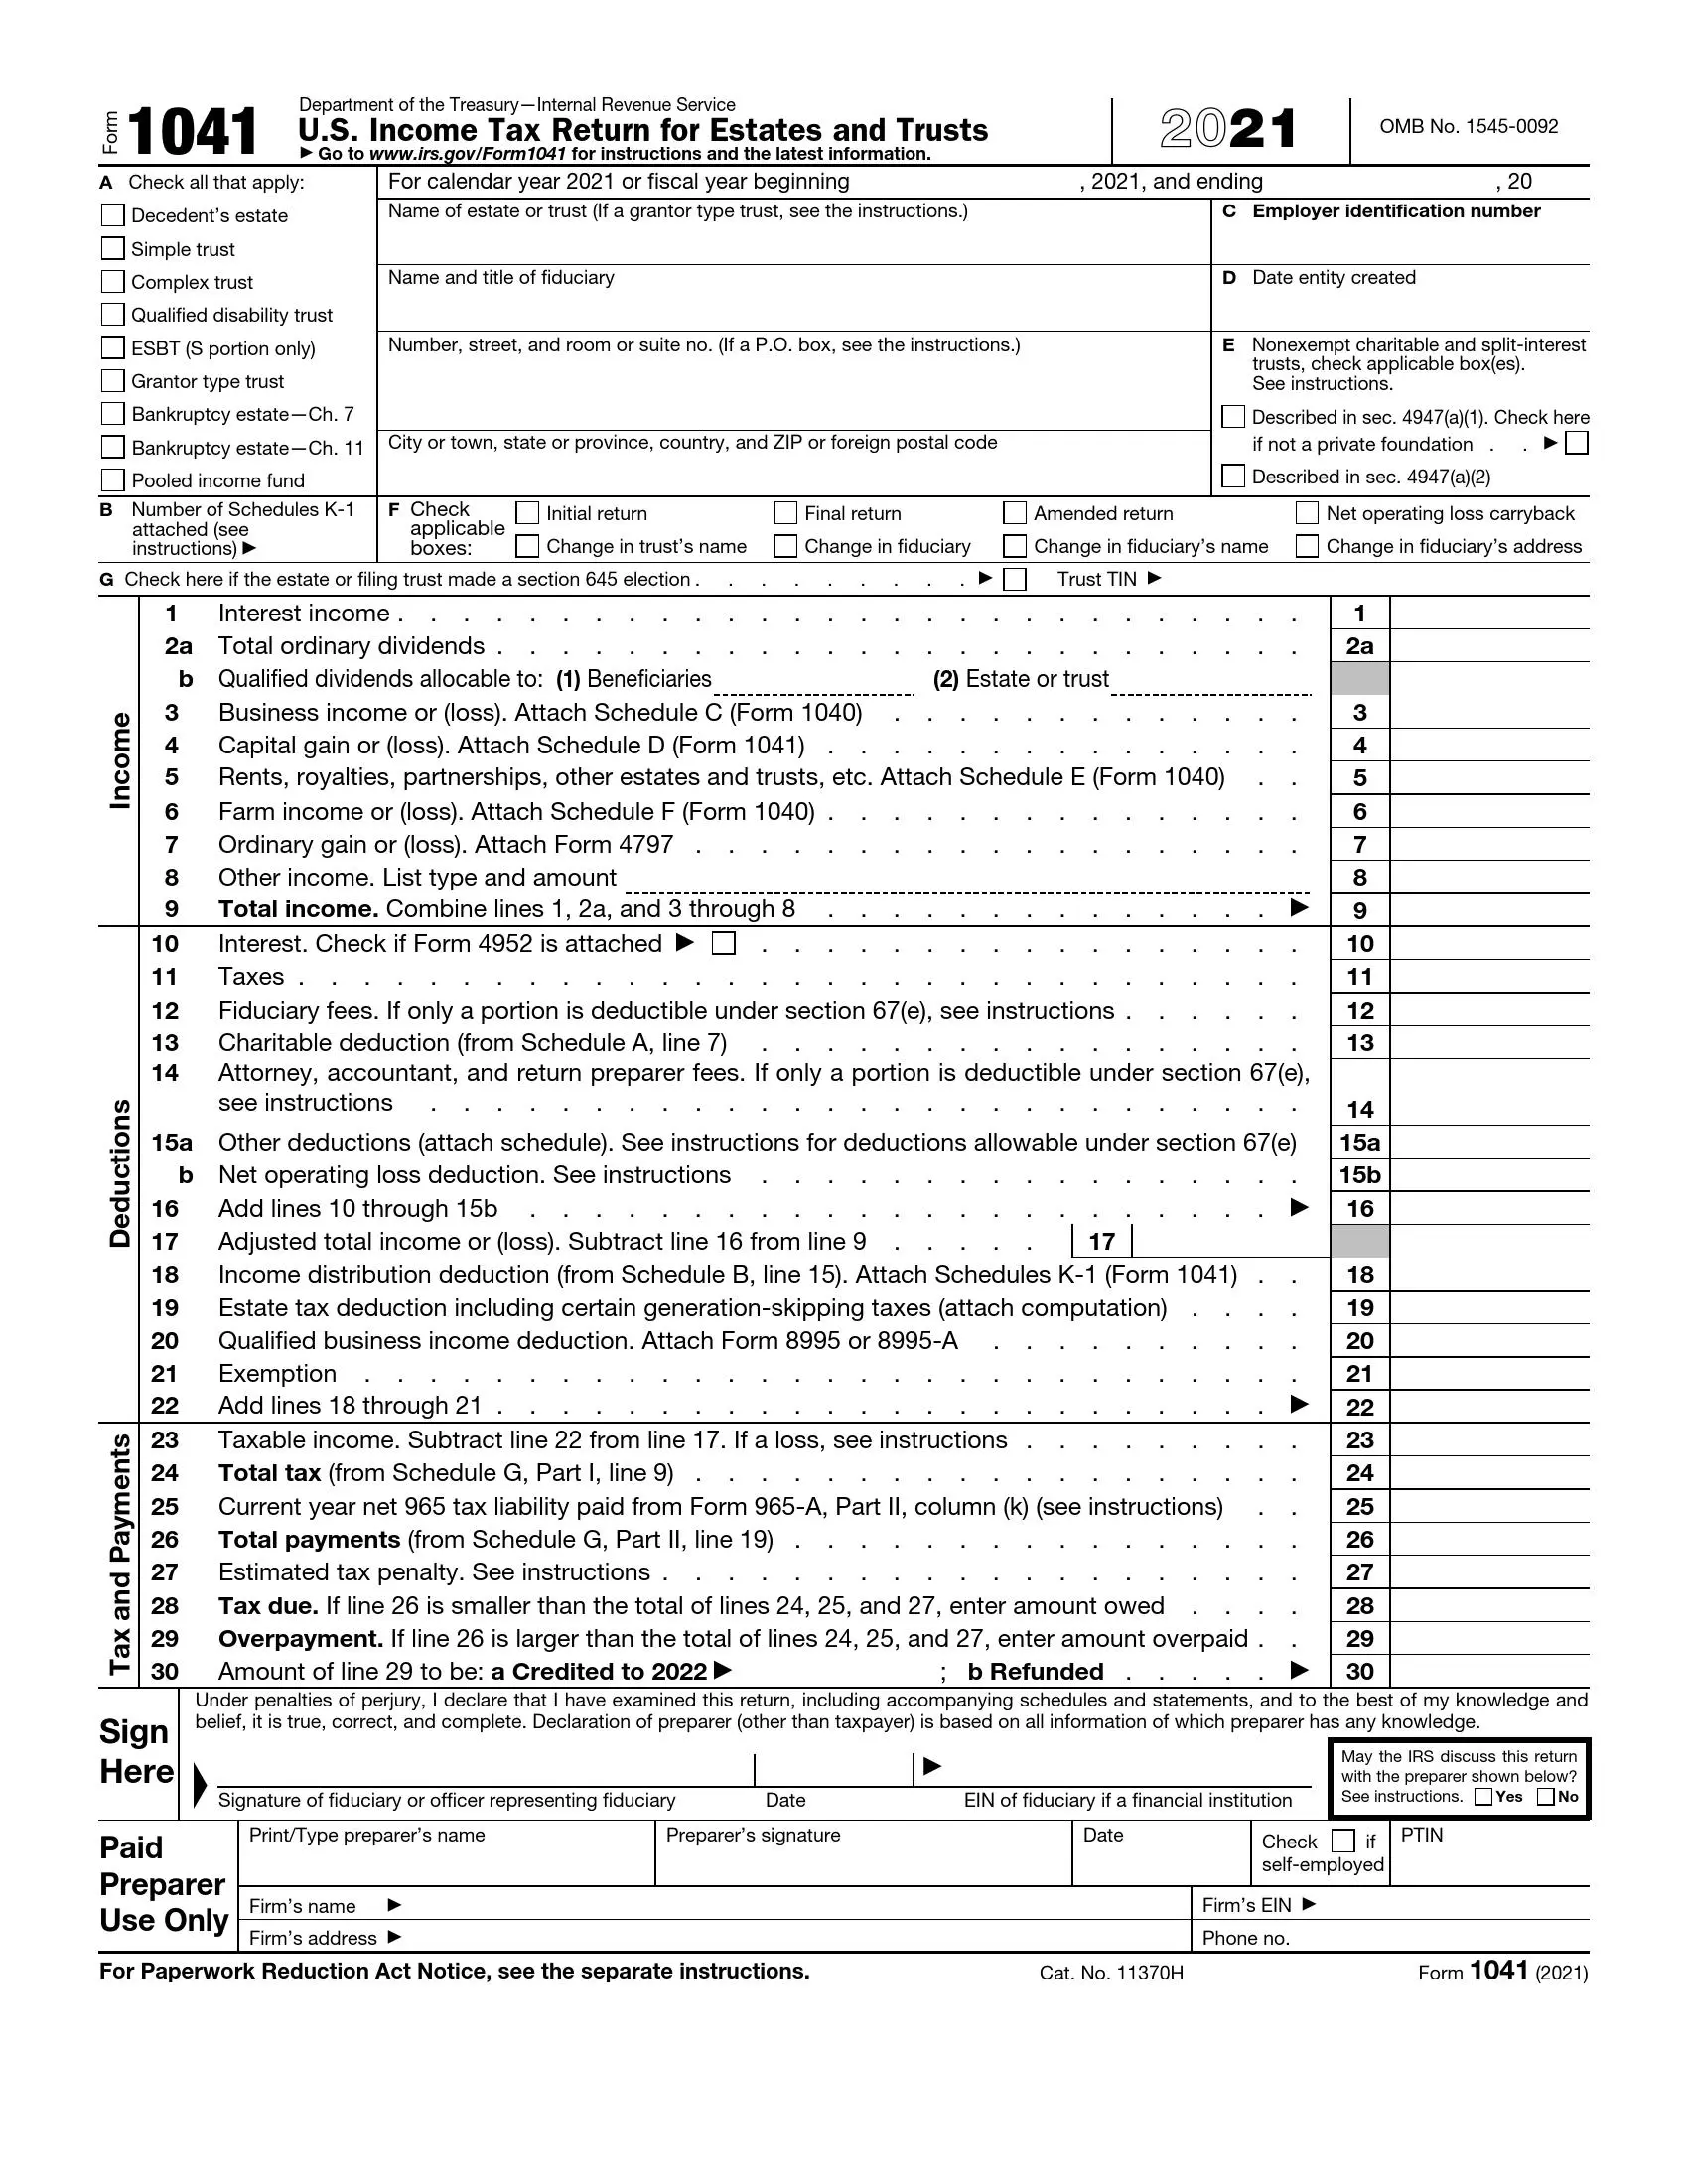 irs form 1041 2021 preview